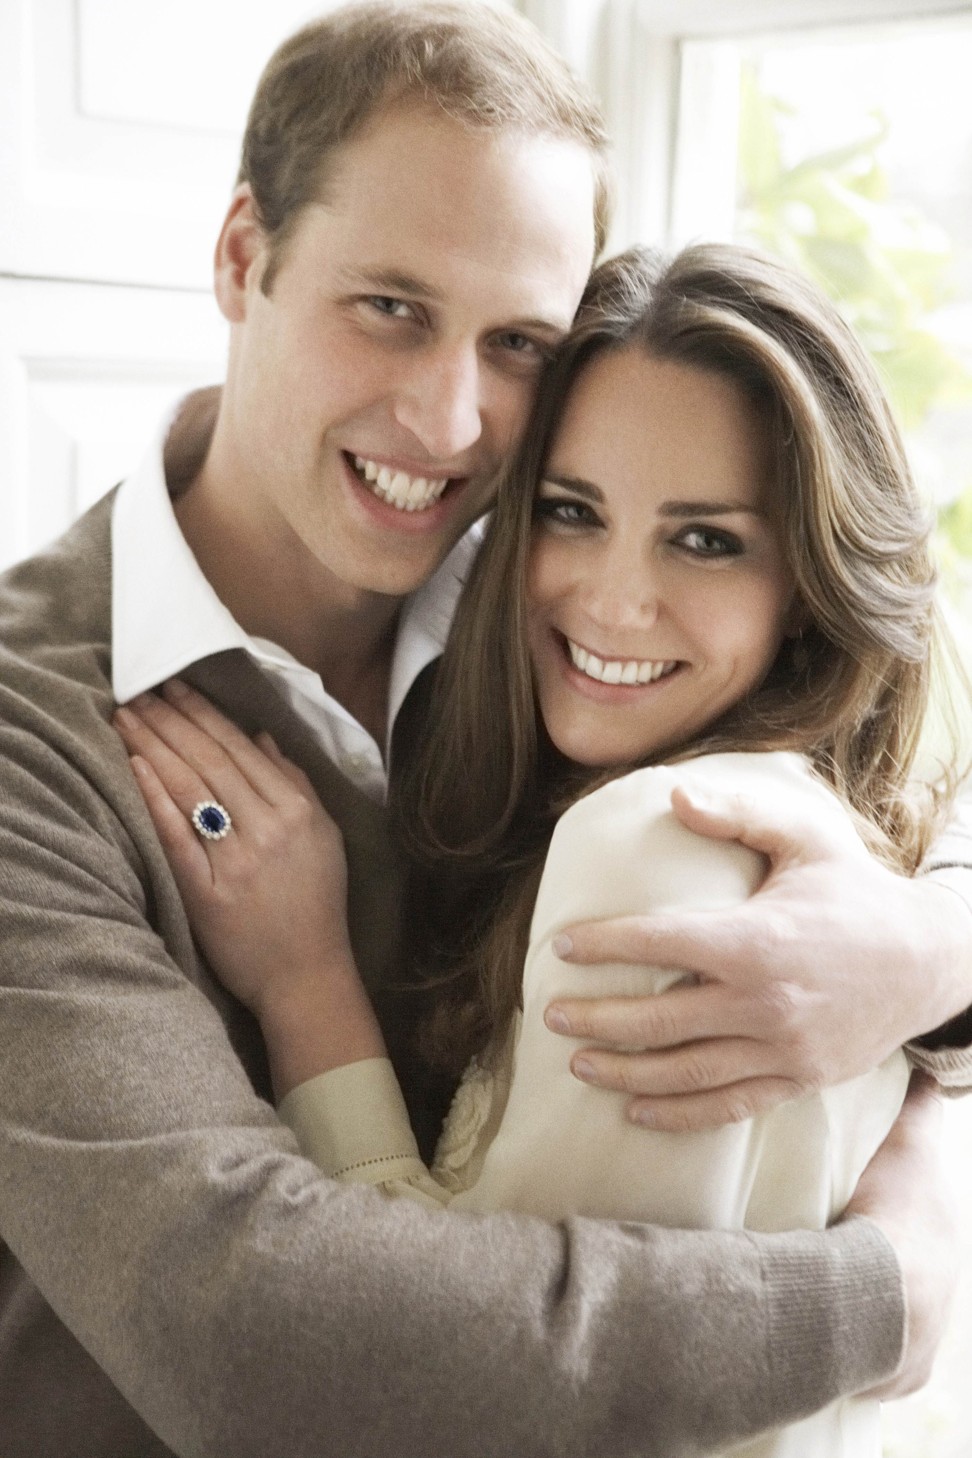 Mario Testino’s works include the Duke and Duchess of Cambridge’s engagement photo. File photo: AFP